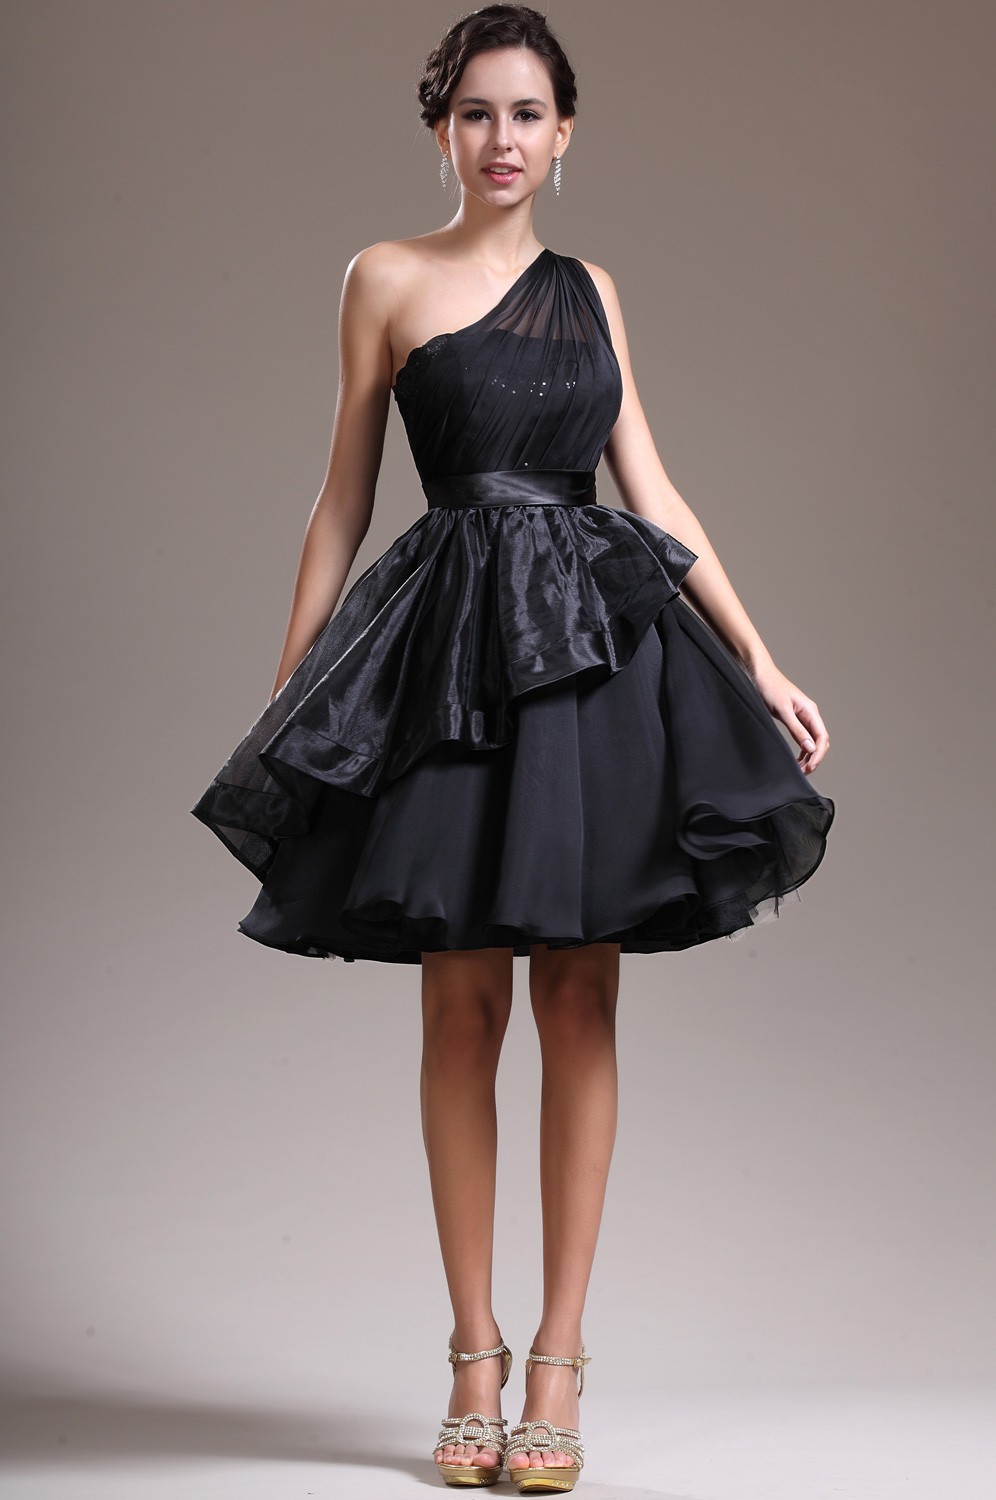 Best Womens Cocktail Dresses For Weddings of all time Learn more here 